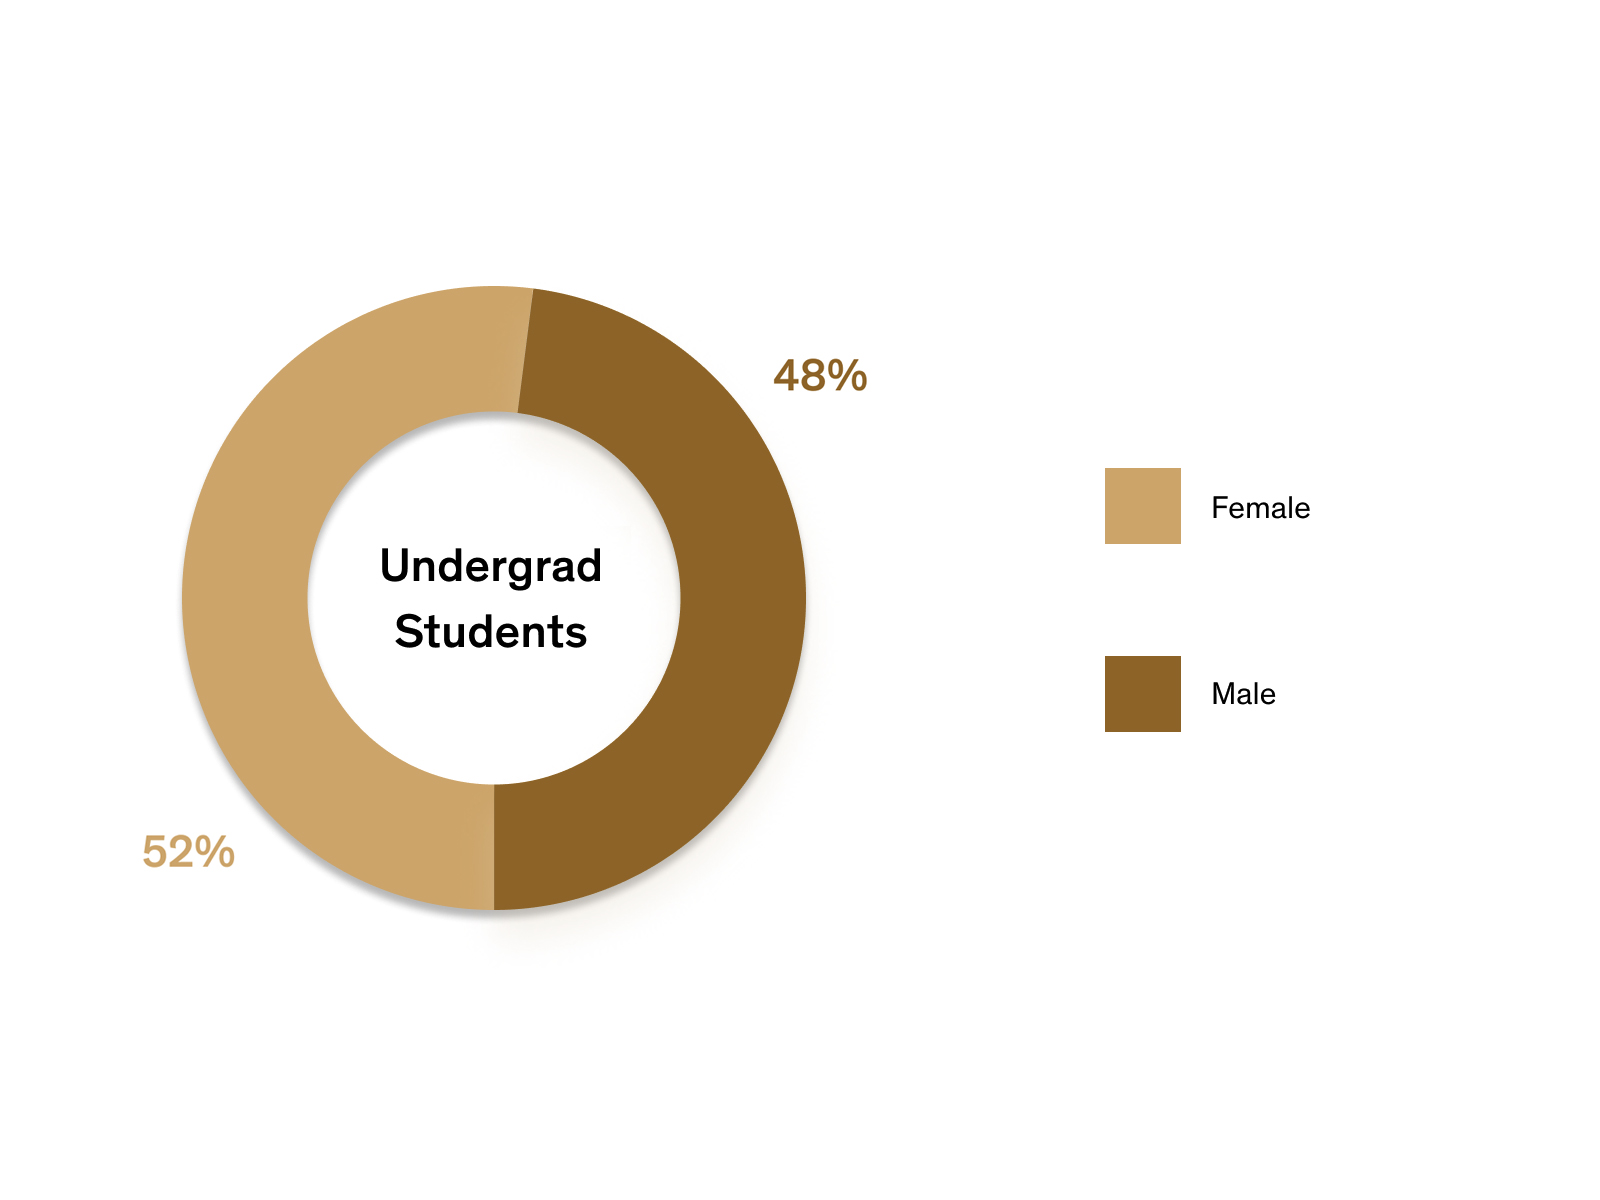 Gender distribution among undergraduate students showing 52% female and 48% male